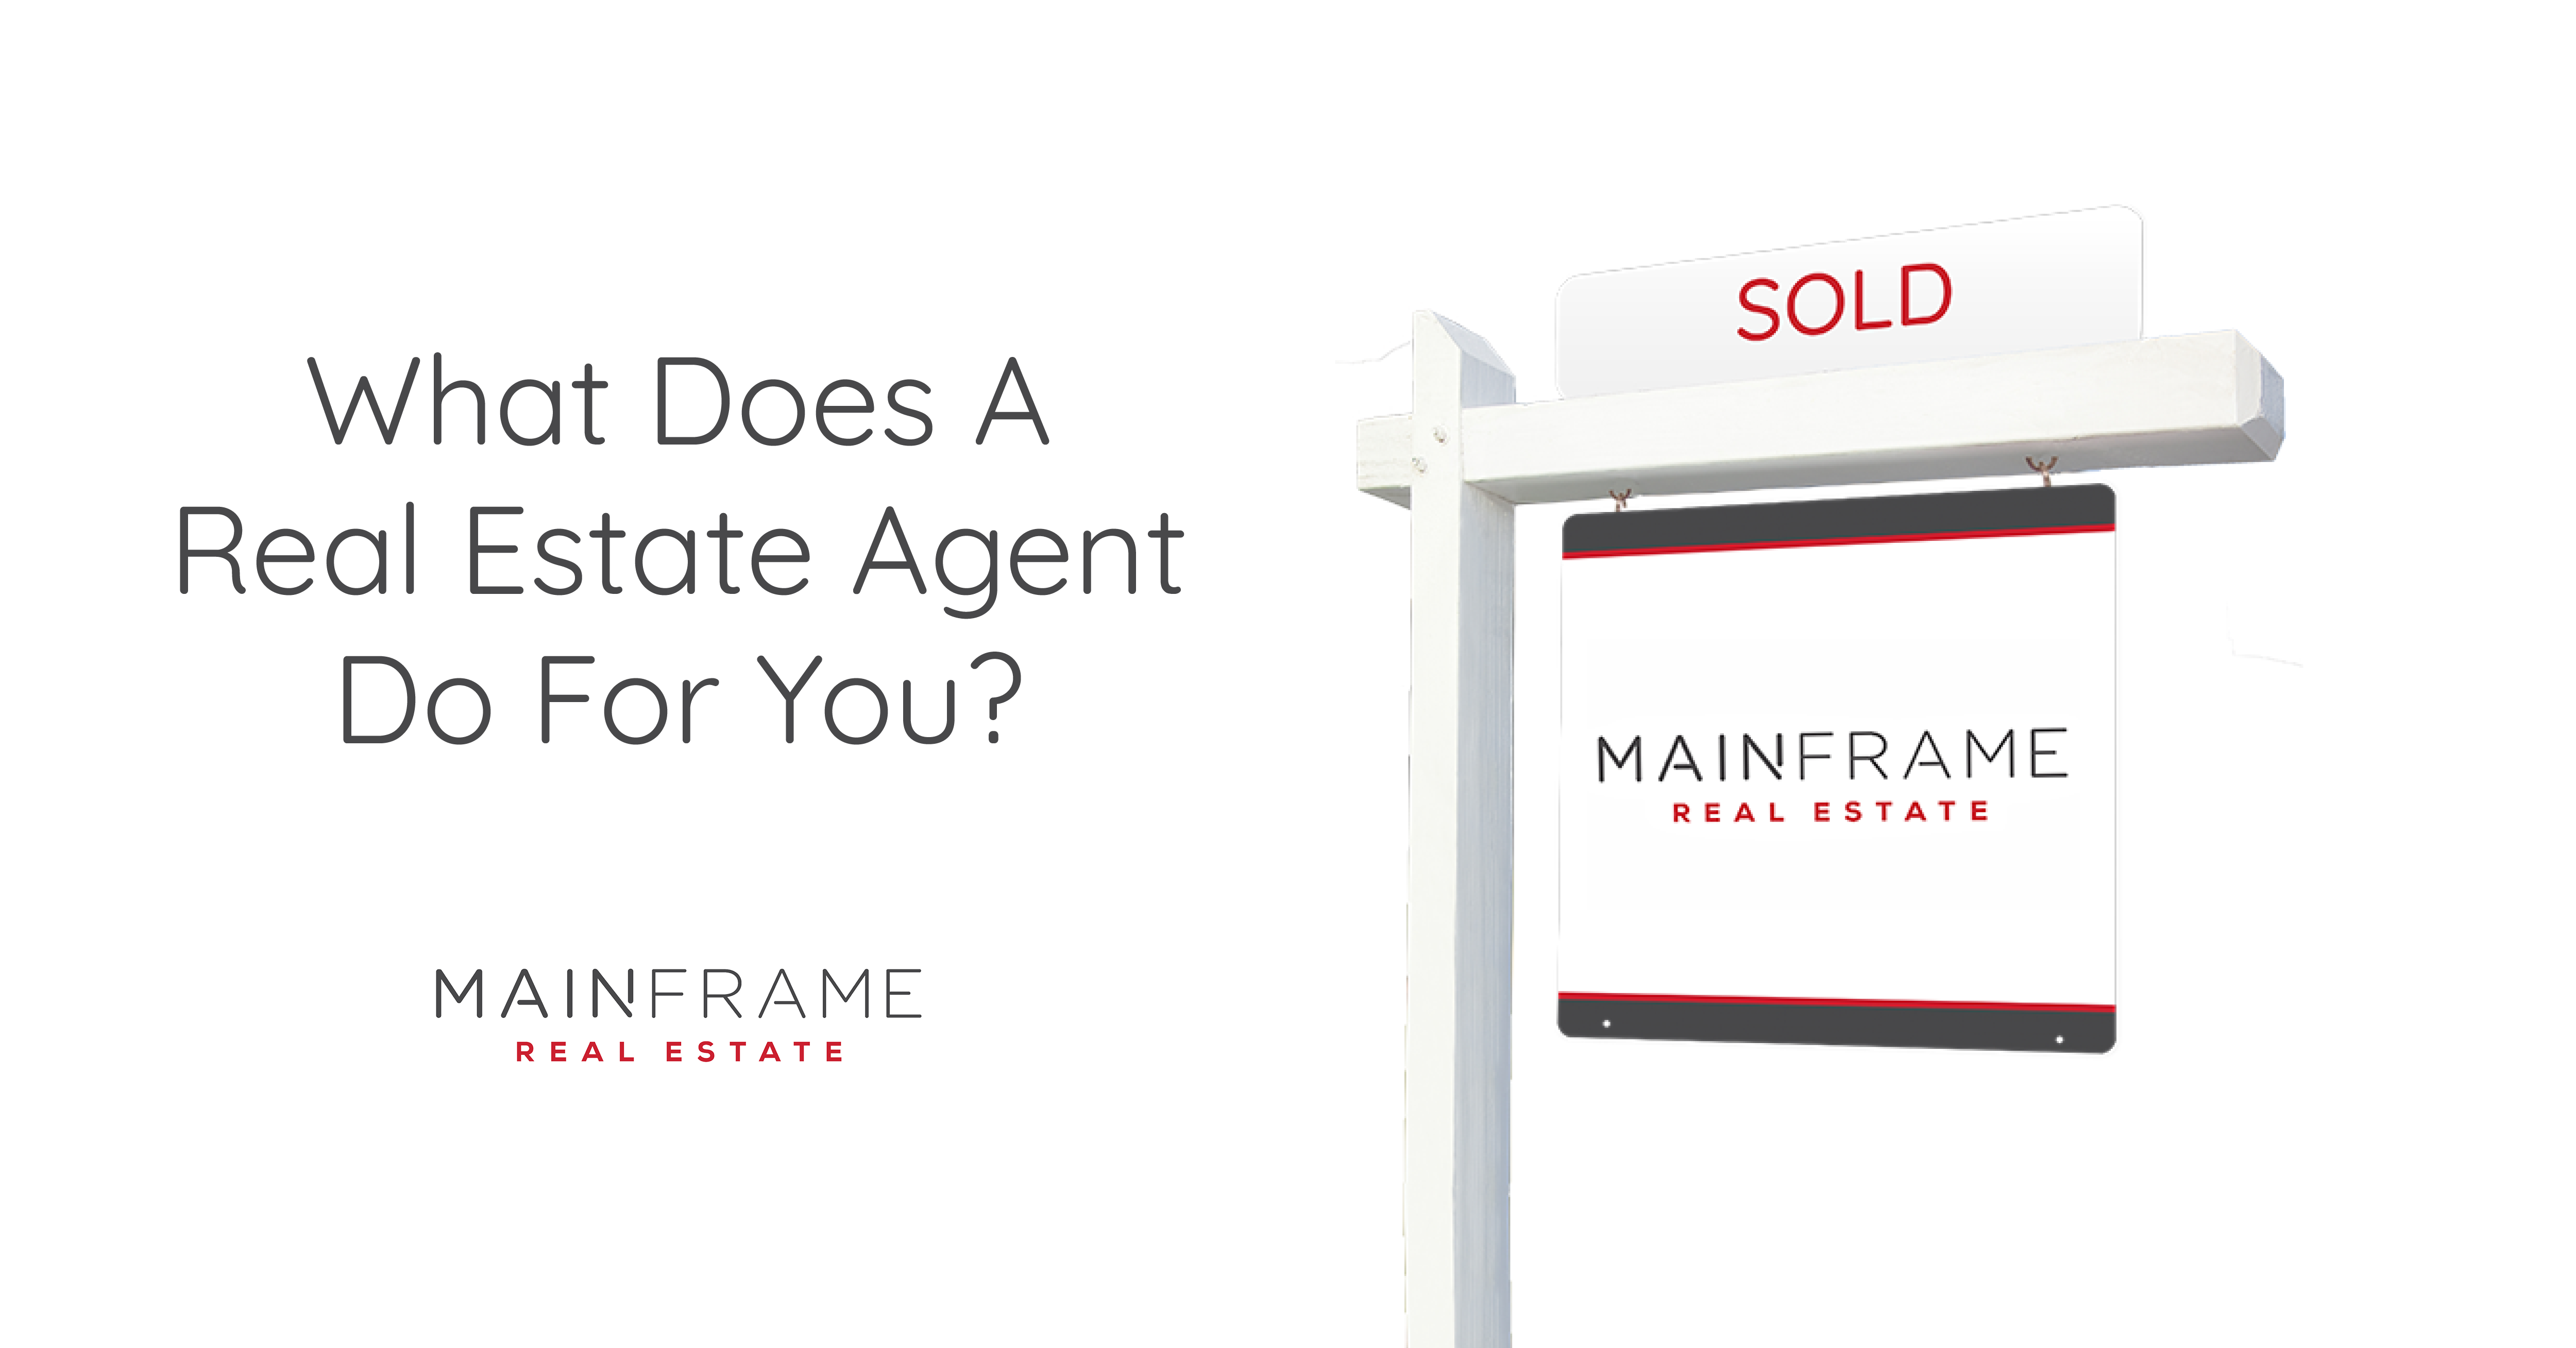 What Does a Real Estate Agent Do For You?